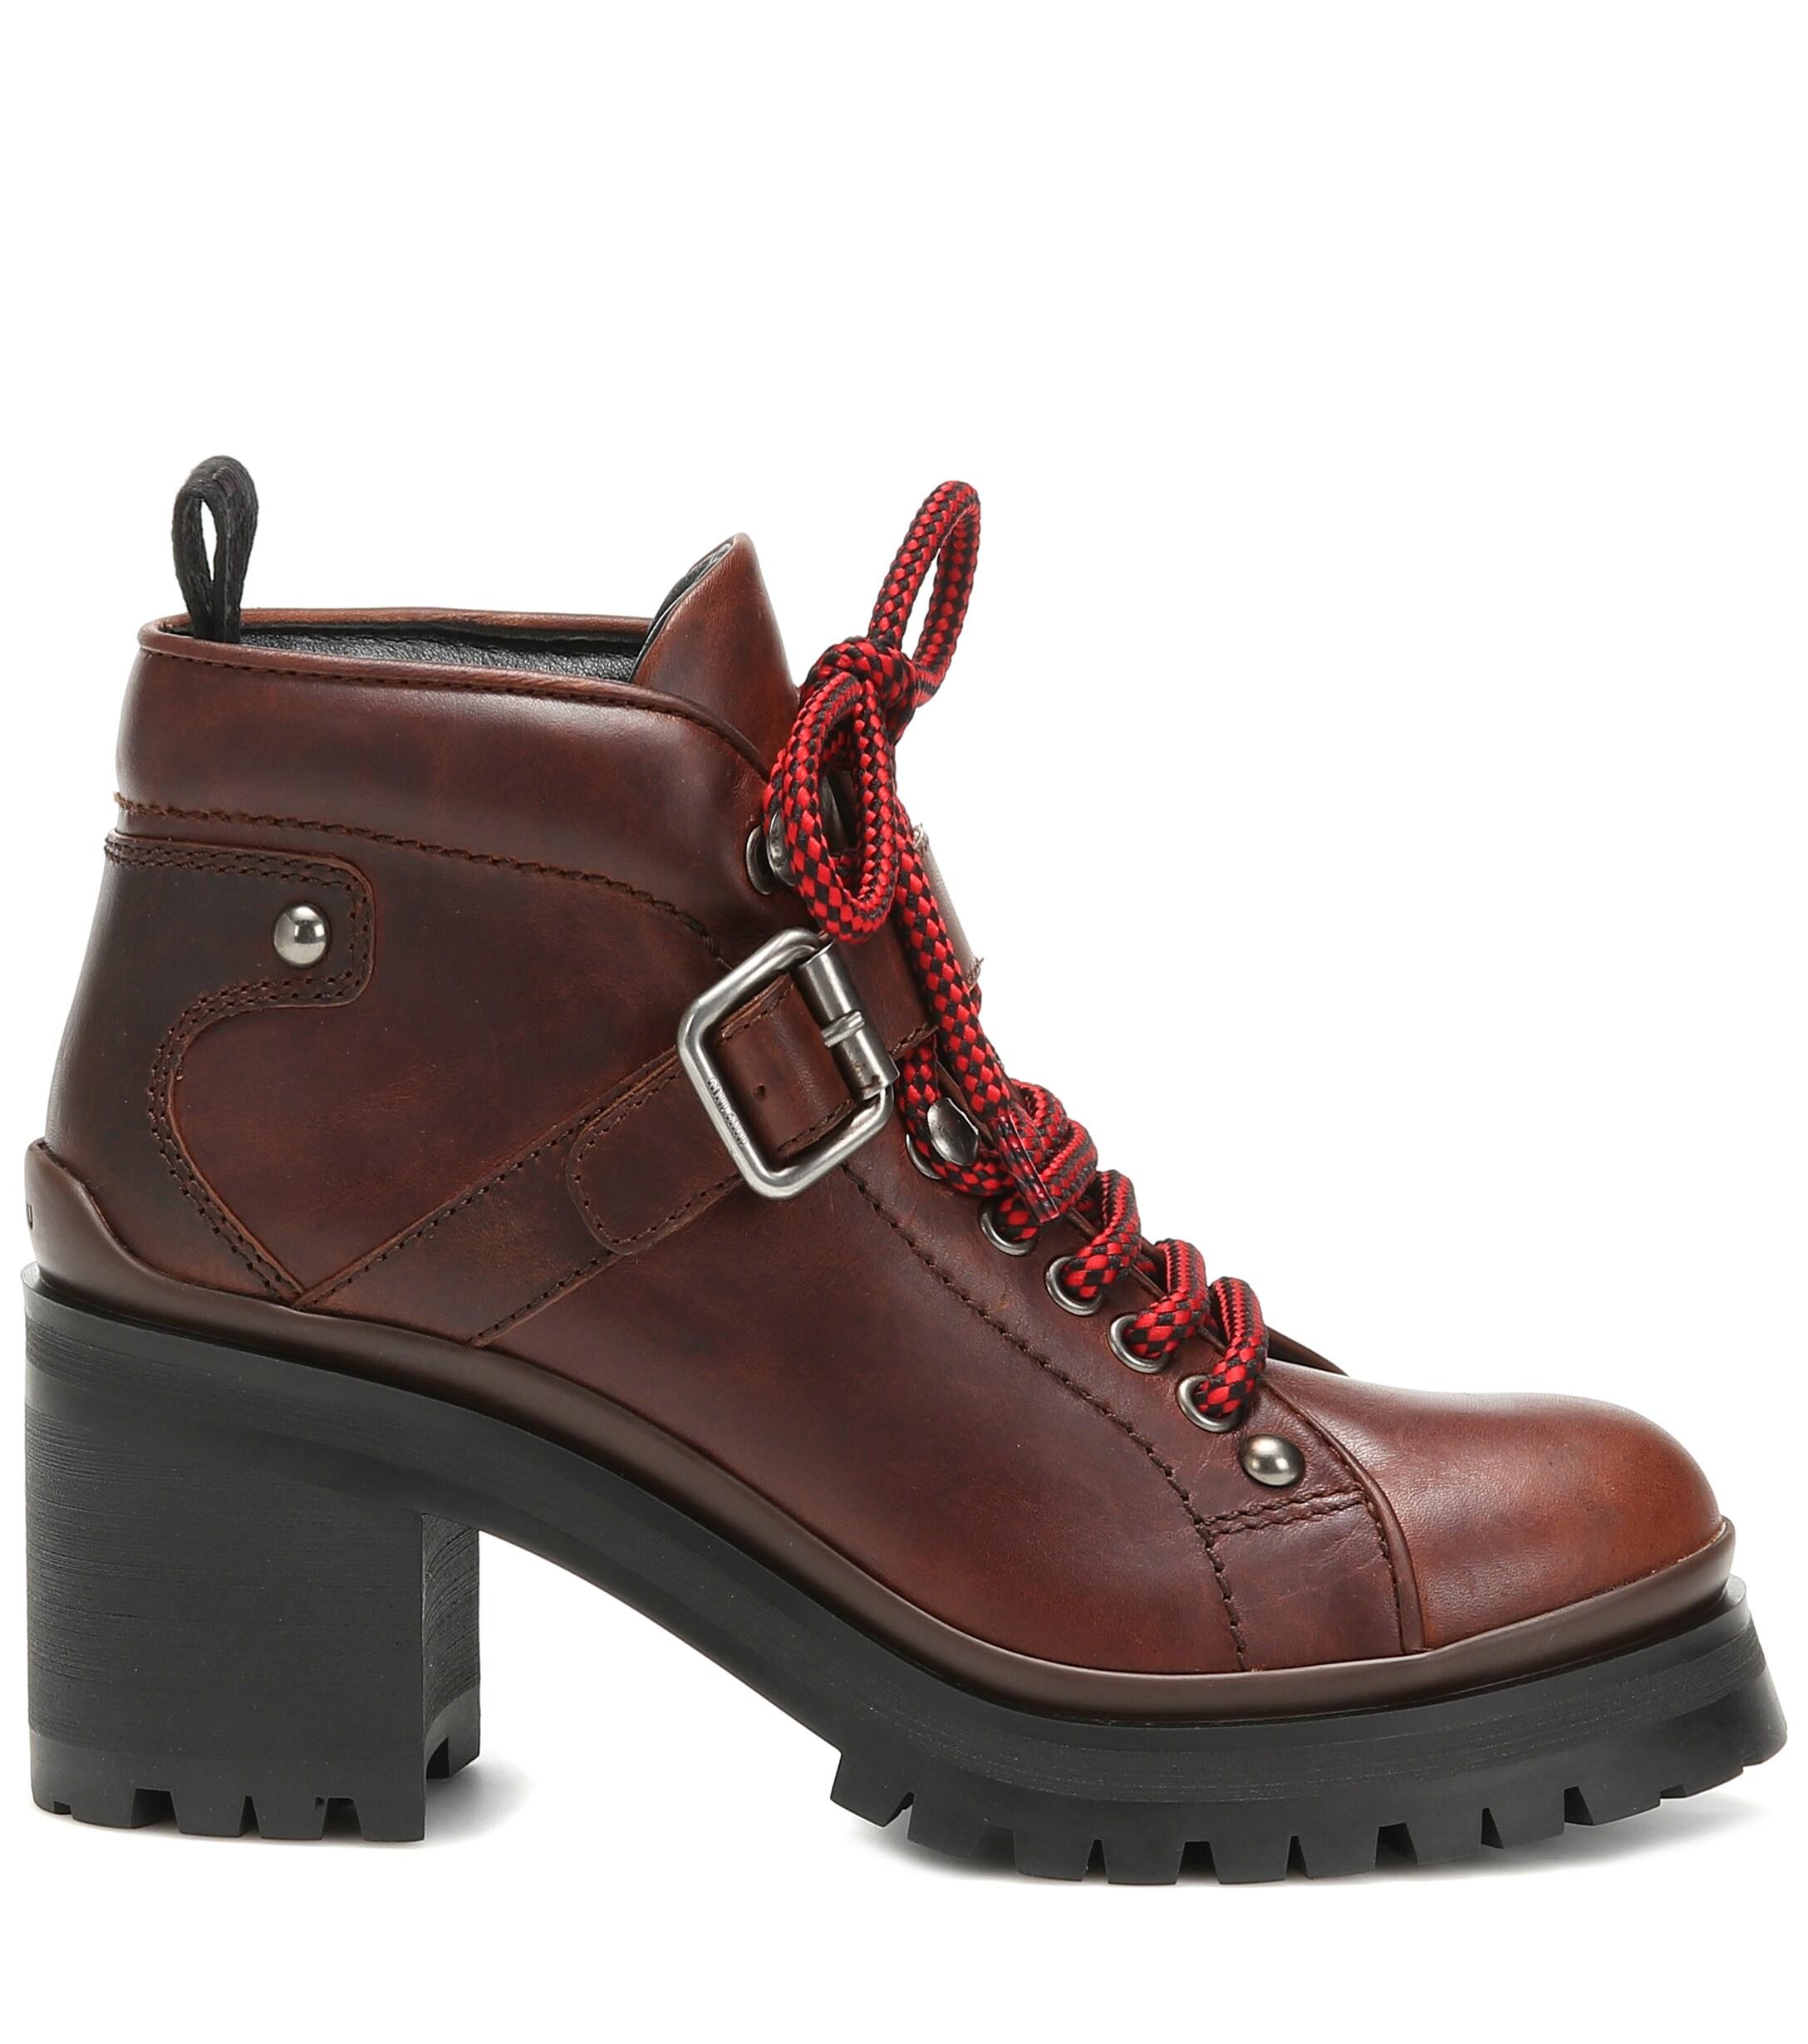 Miu Miu Laced Leather Ankle Boots in Cognac (Brown) - Lyst